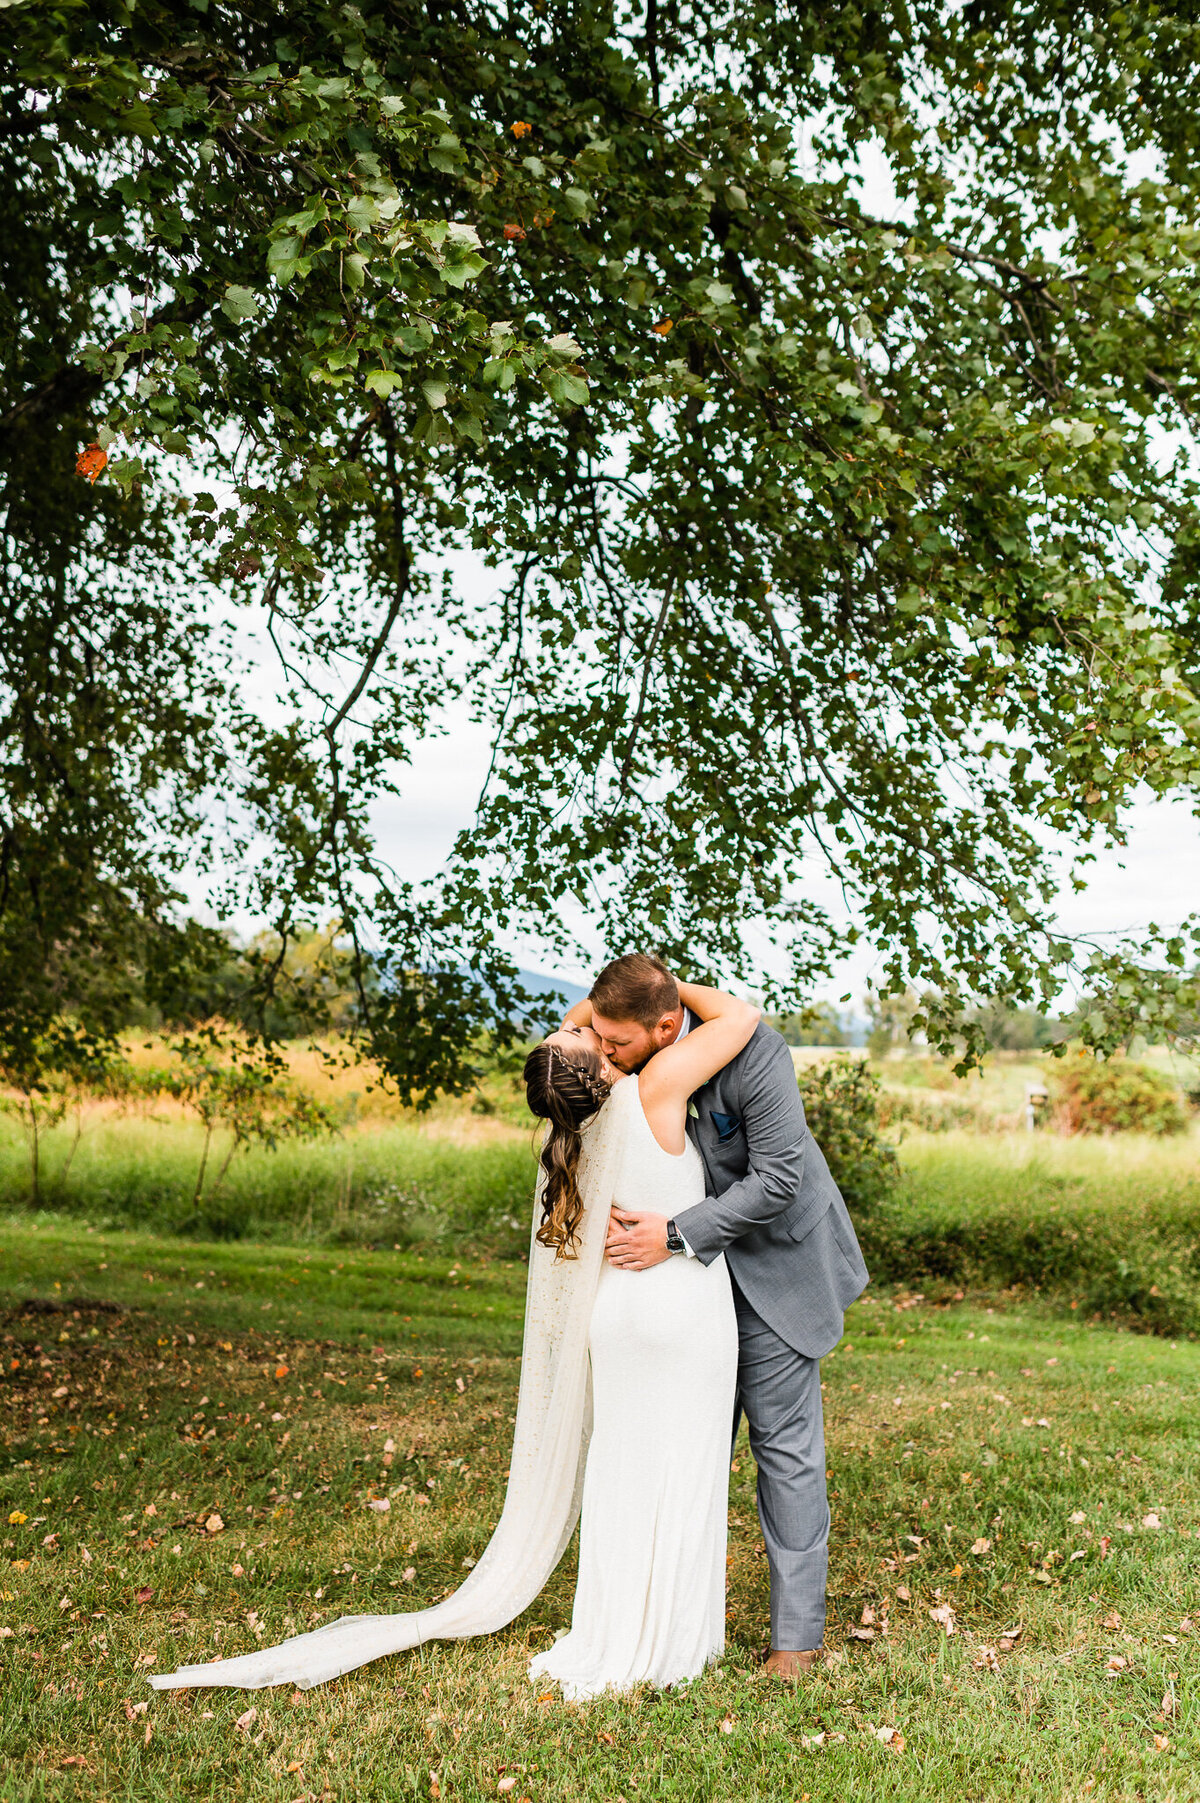 bride and groom embracing on a field under trees as she groom holds the brides waist and she leans back as he kisses her neck captured by Virginia wedding photographer